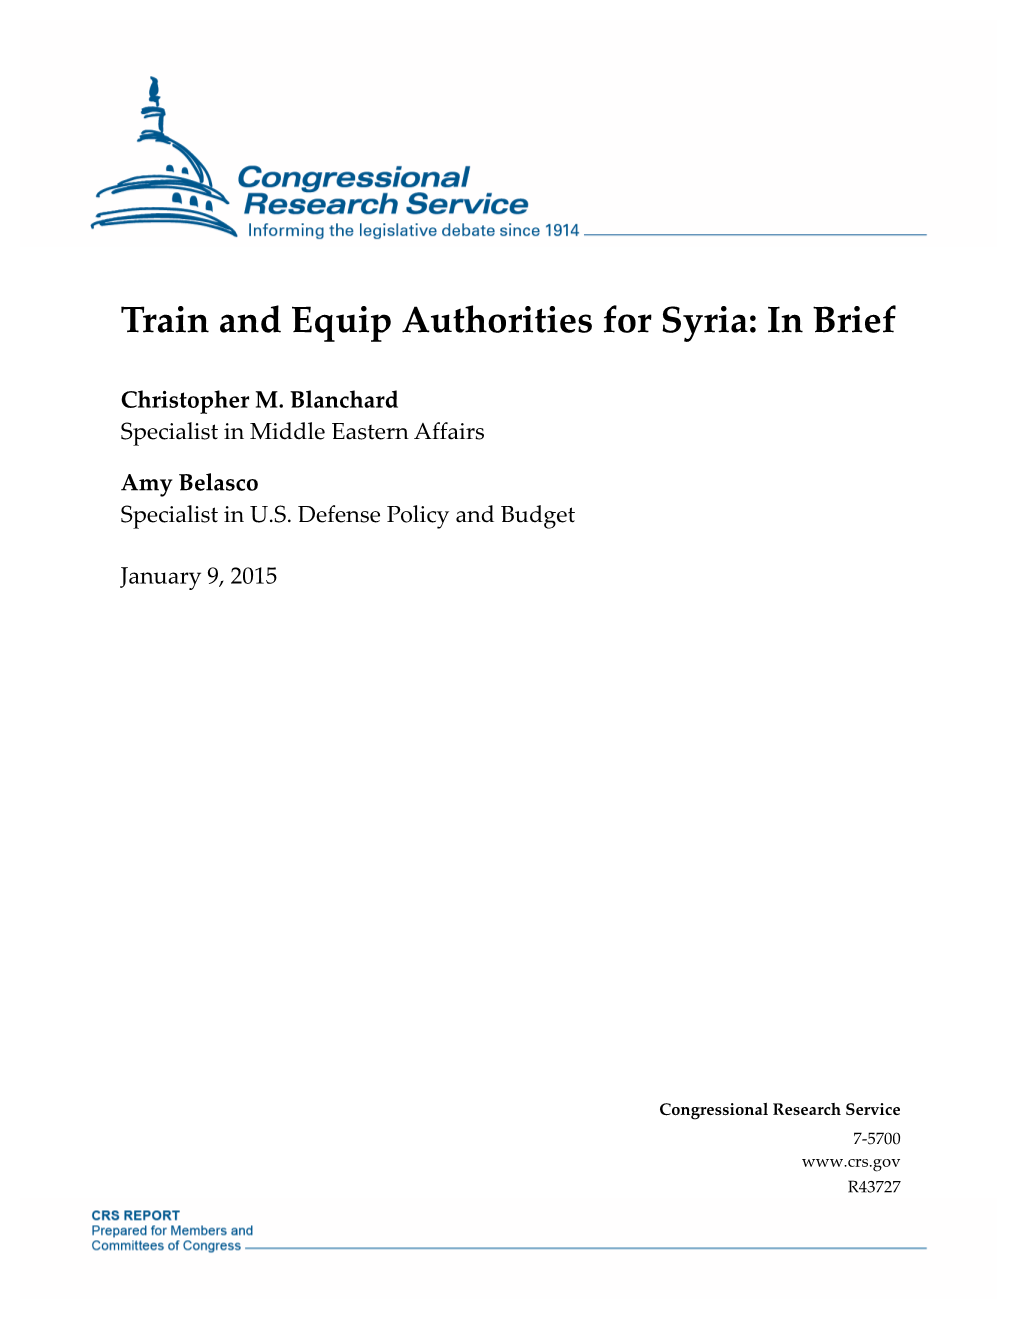 Train and Equip Authorities for Syria: in Brief